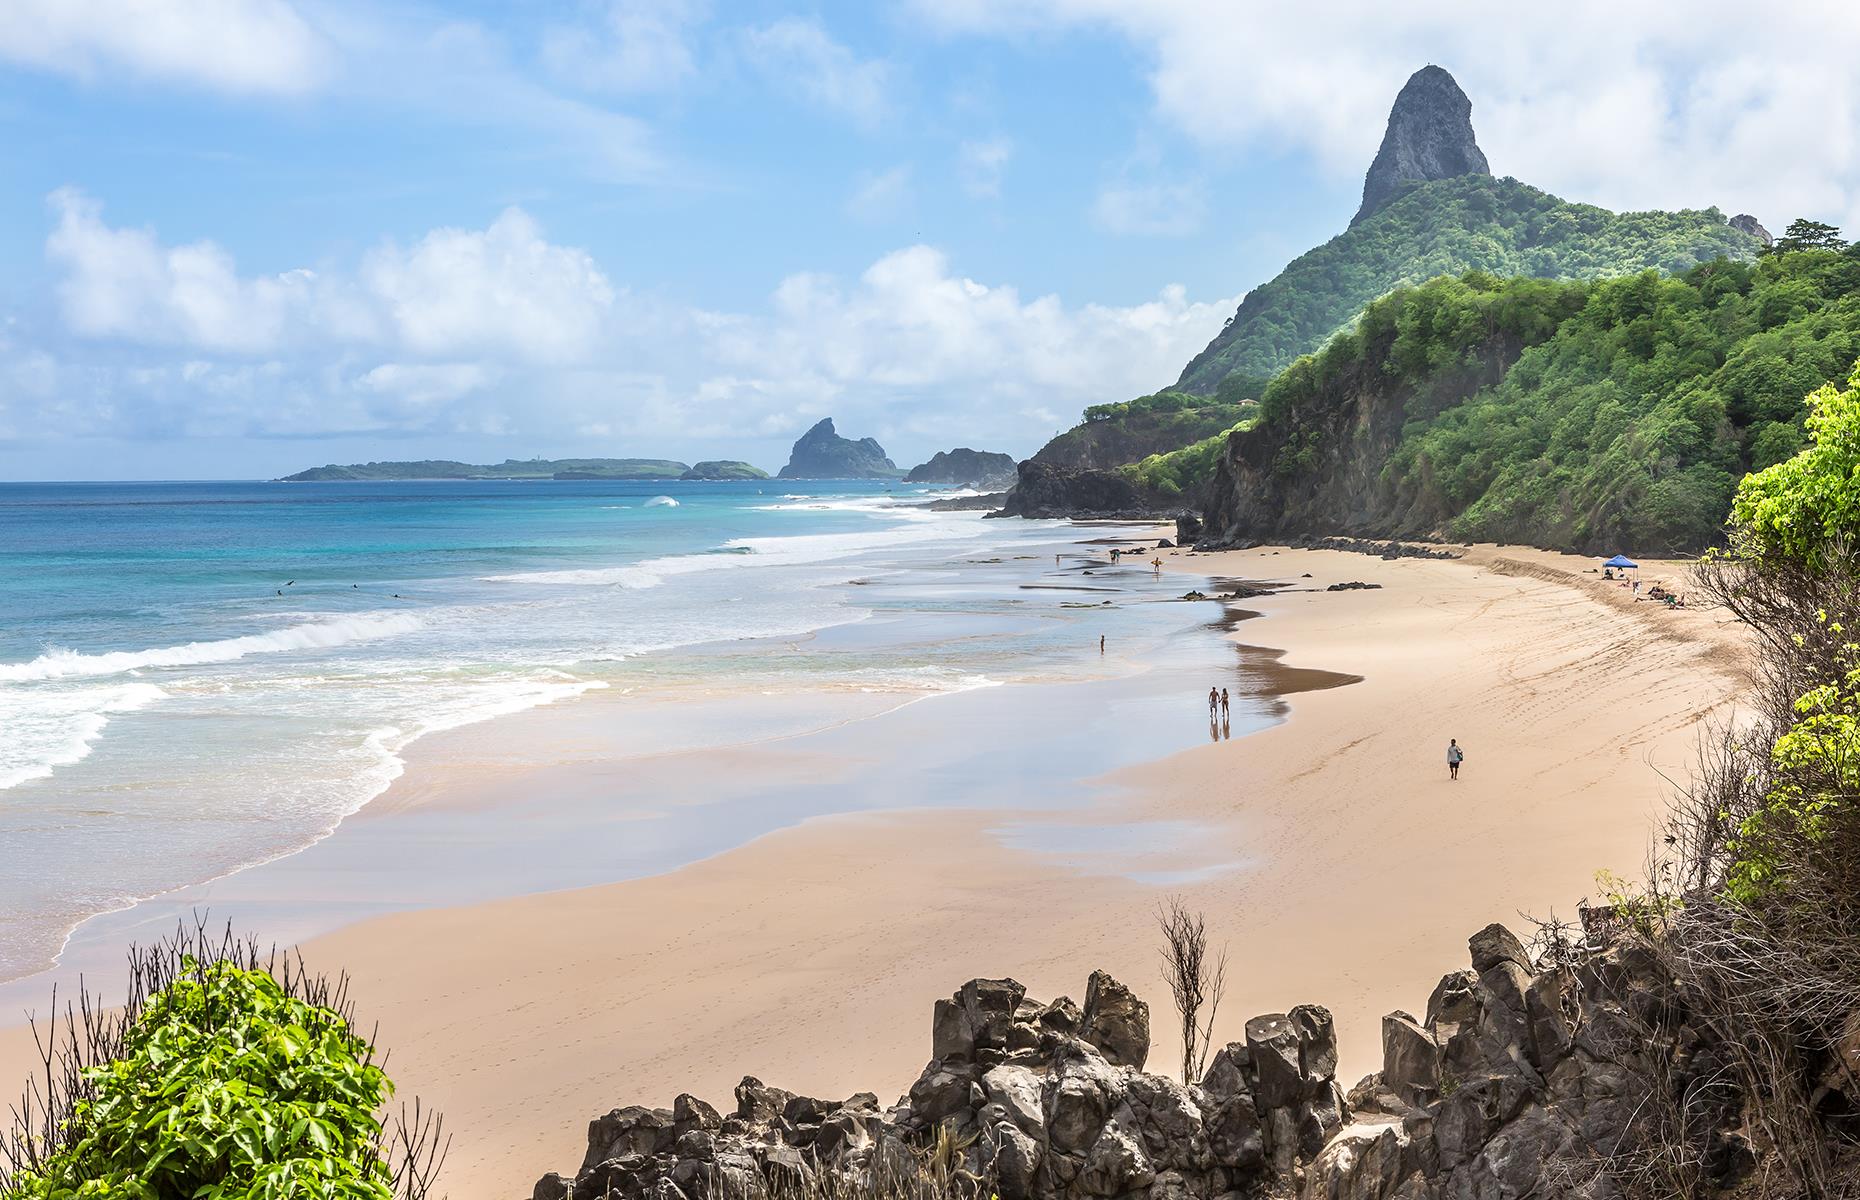 <p>Crowned number one in Tripadvisor's annual <a href="https://www.tripadvisor.co.uk/TravelersChoice-Beaches">Travelers' Choice</a> awards in 2023, Brazil's Baia do Sancho is a picturesque and undisturbed stretch of sand, located on the small island of Fernando de Noronha off the coast of central Brazil. Consistently ranked among the world's best beaches, it's a quiet spot surrounded by rainforest and is only accessible via steep steps carved into the rockside that hugs it.</p>